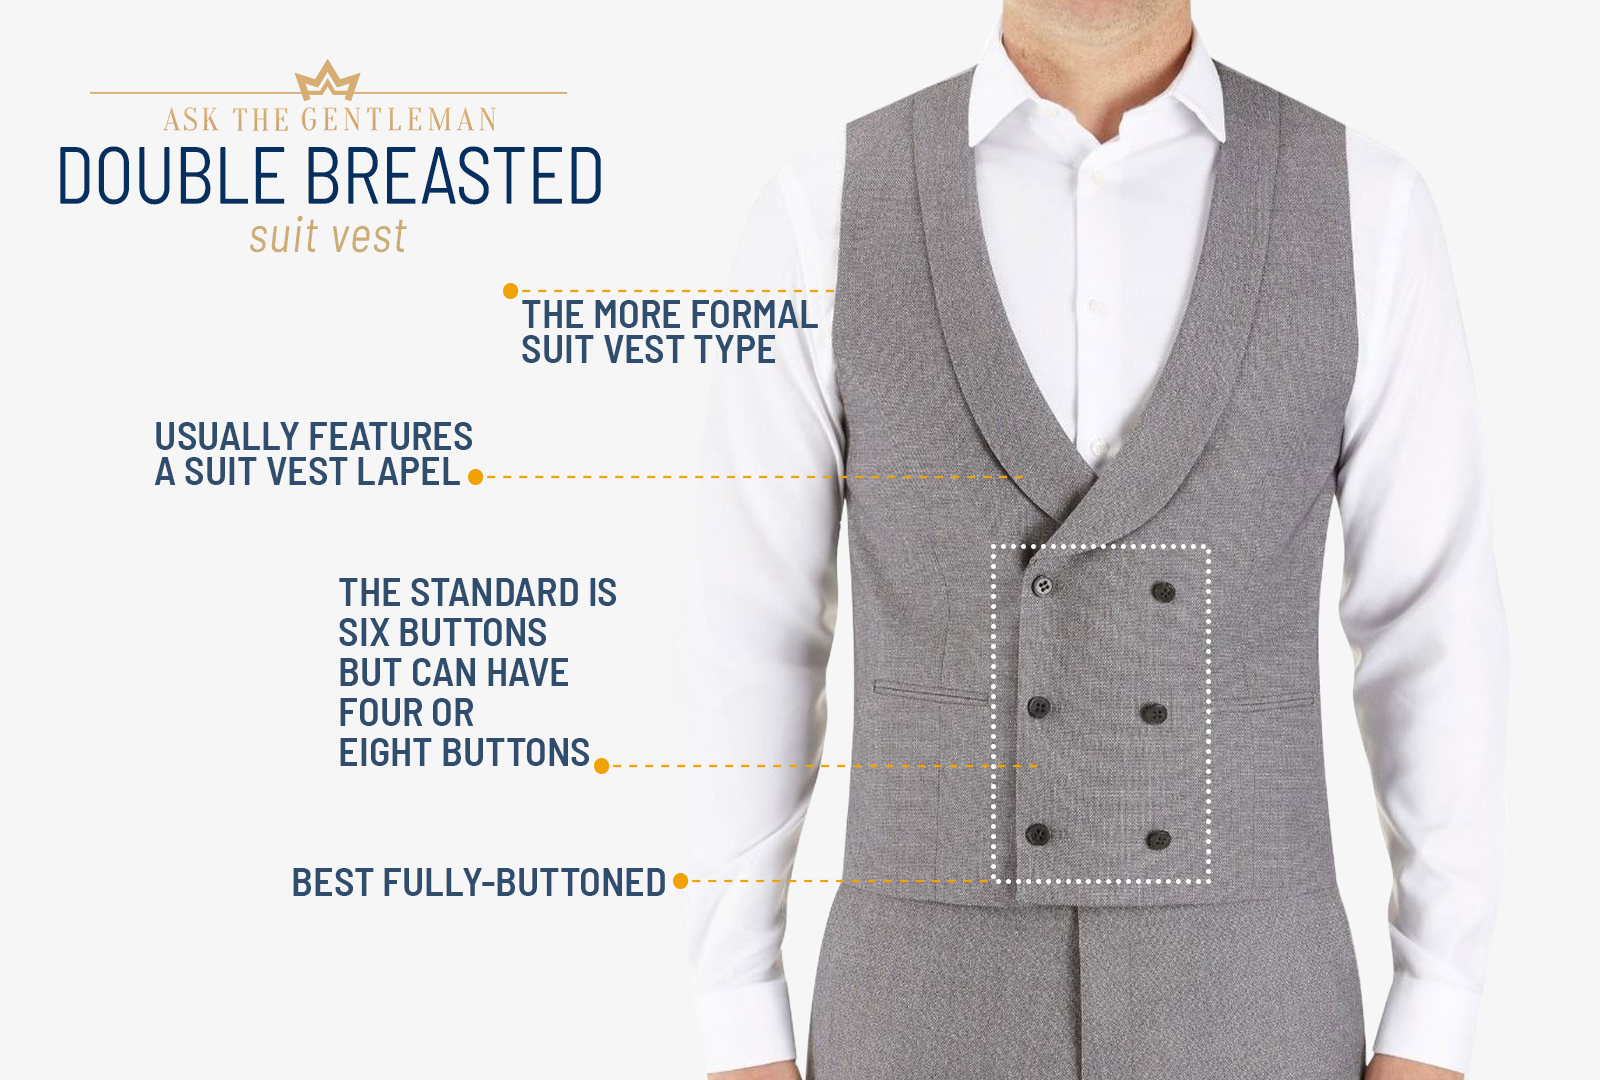 What is a double-breasted suit vest